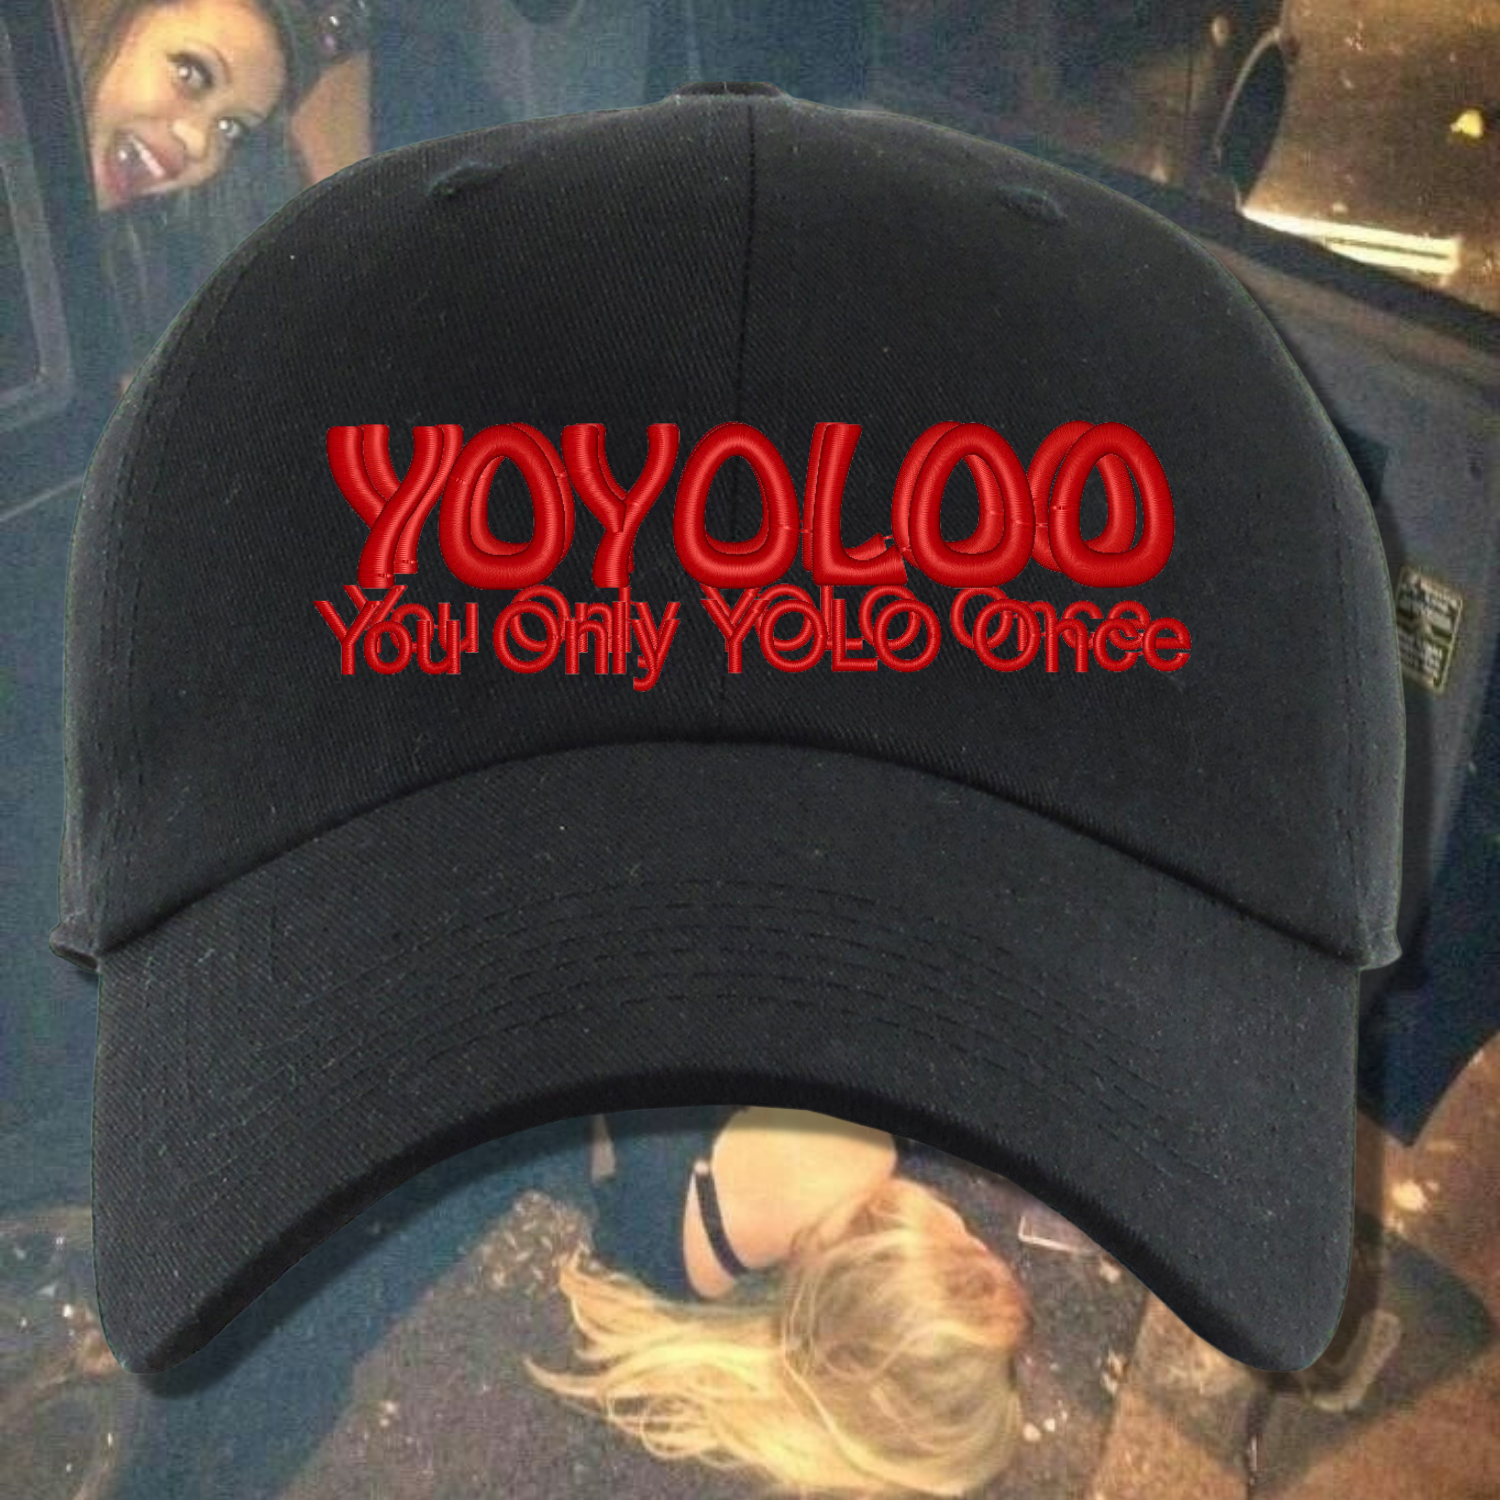 YOYOLOO You Only YOLO Once Embroidered Dad Hat, One Size Fits All